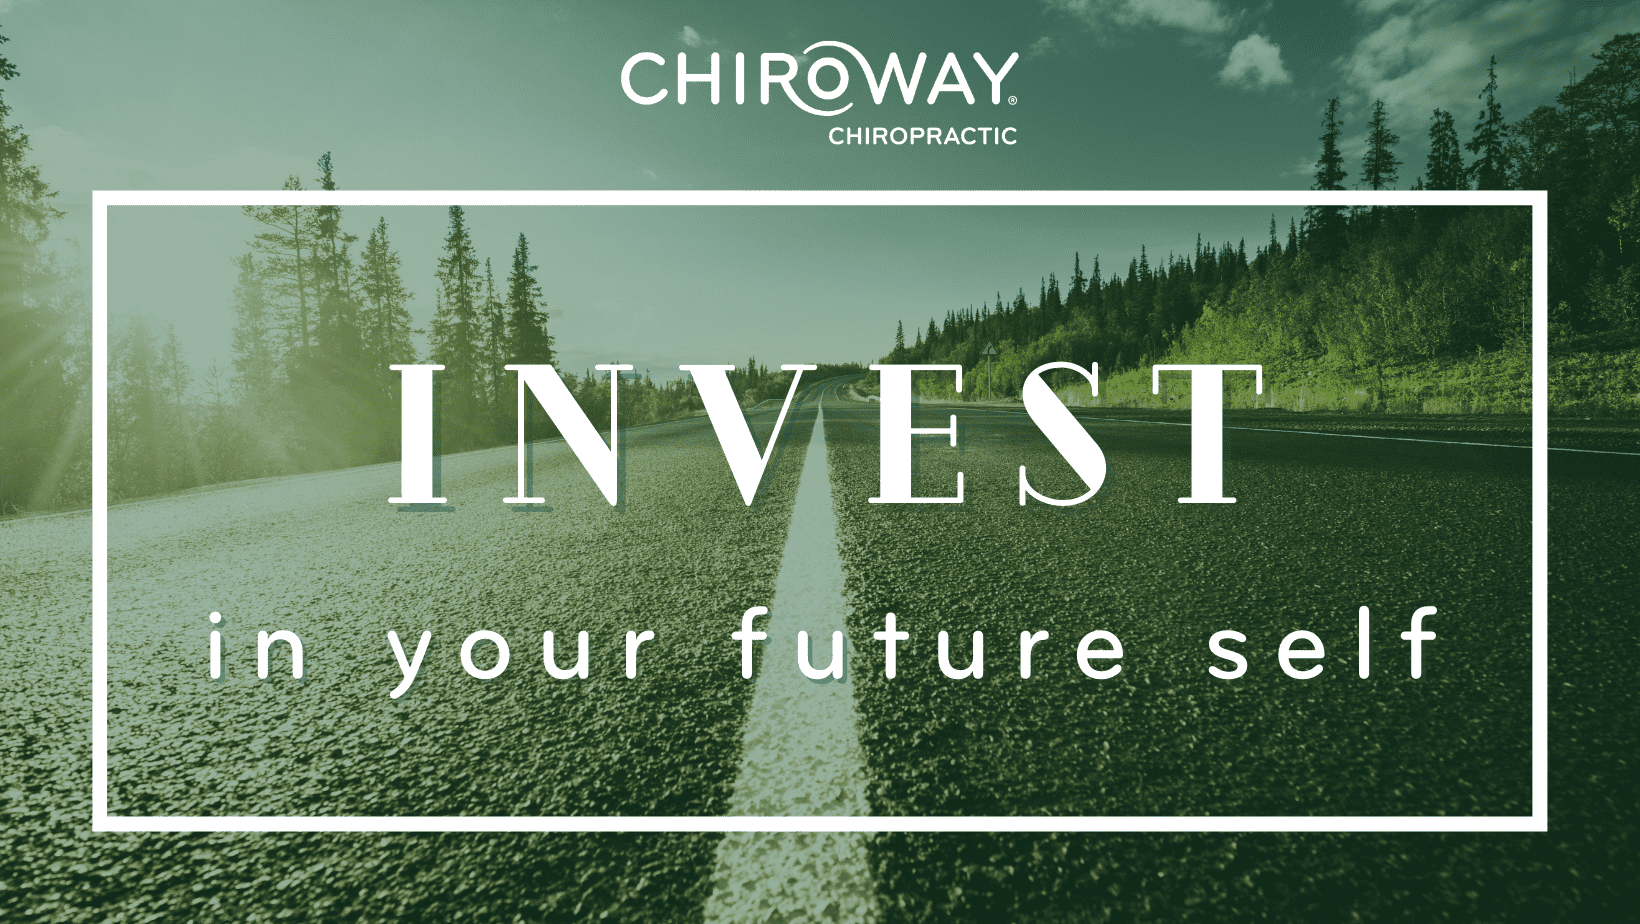 Invest in Your Future Self